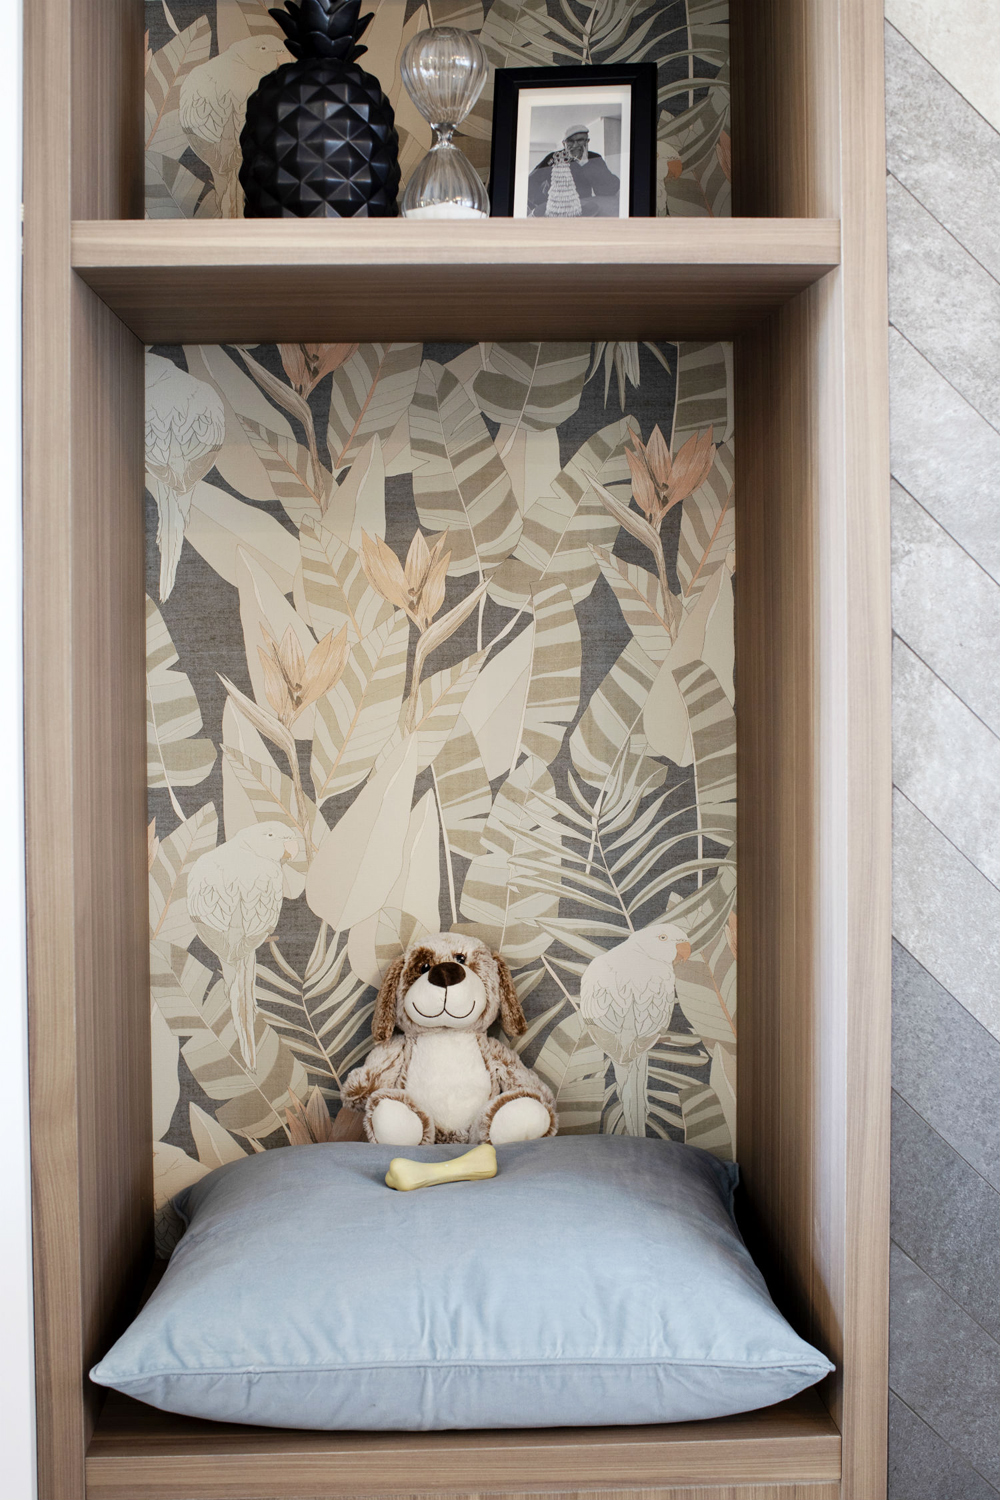 A tall, narrow wood bookcase with patterned wallpaper in the built-in for a pop of colour